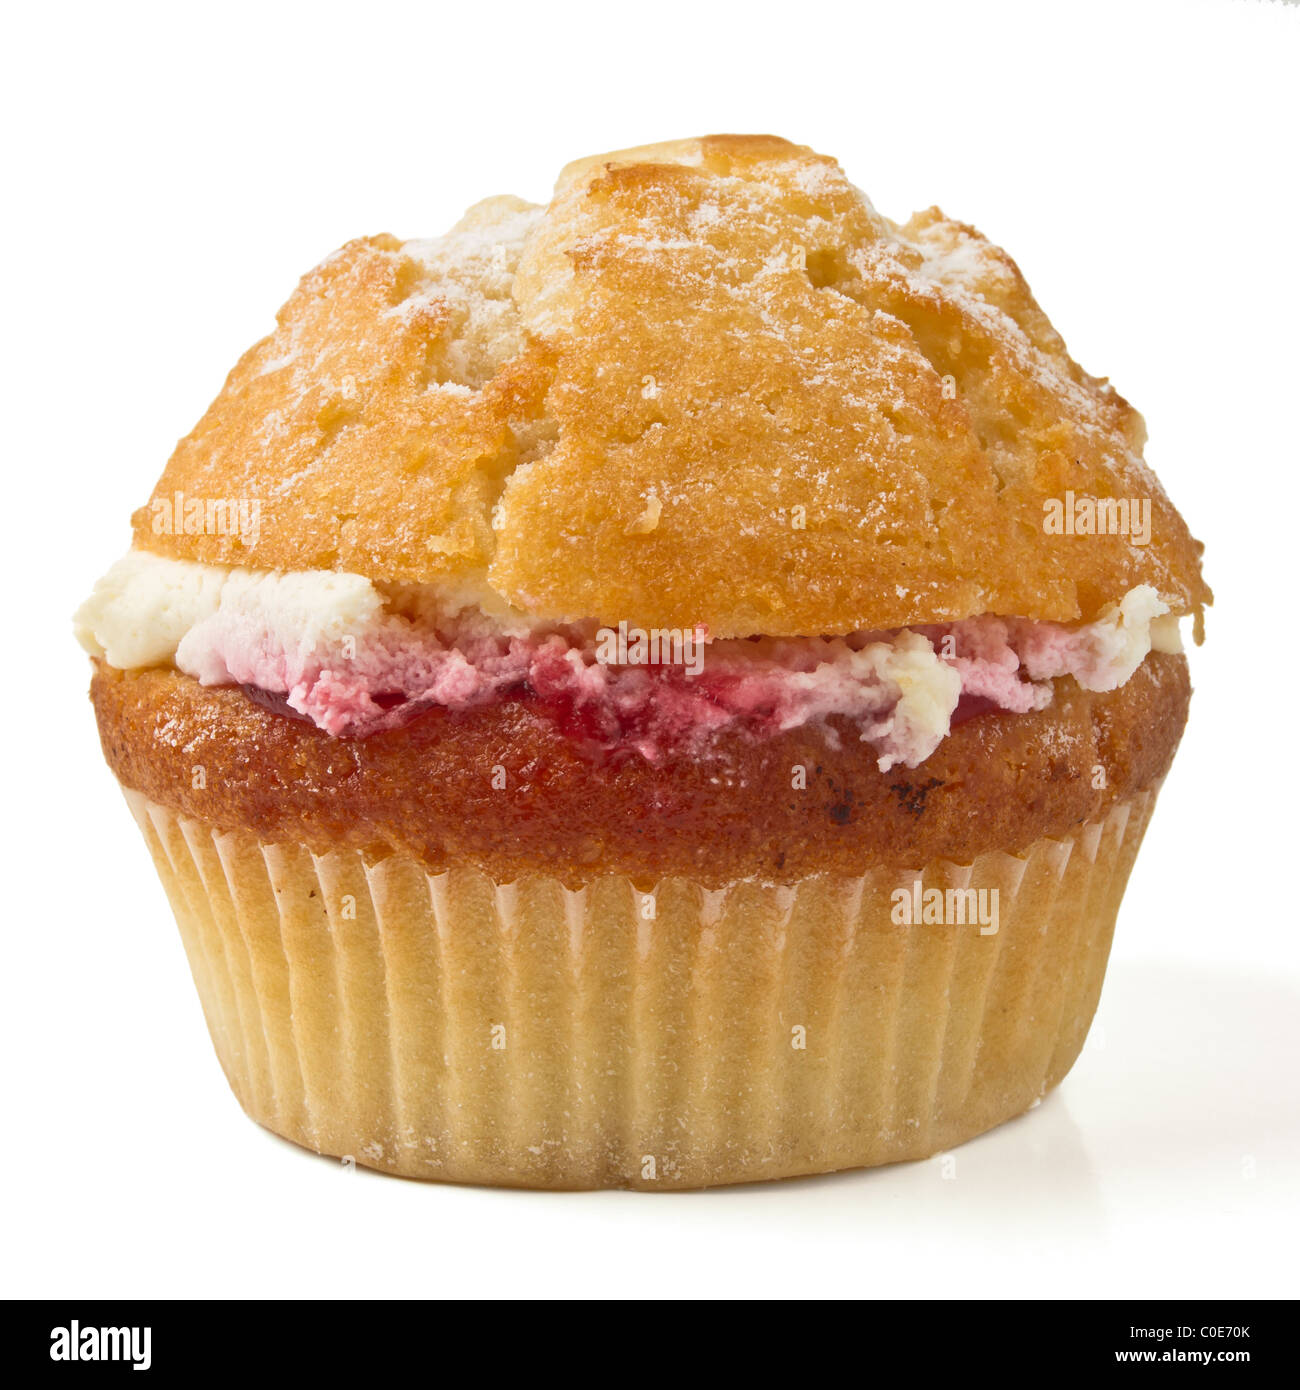 Cream and raspberry filled muffin close up isolated on white. Stock Photo